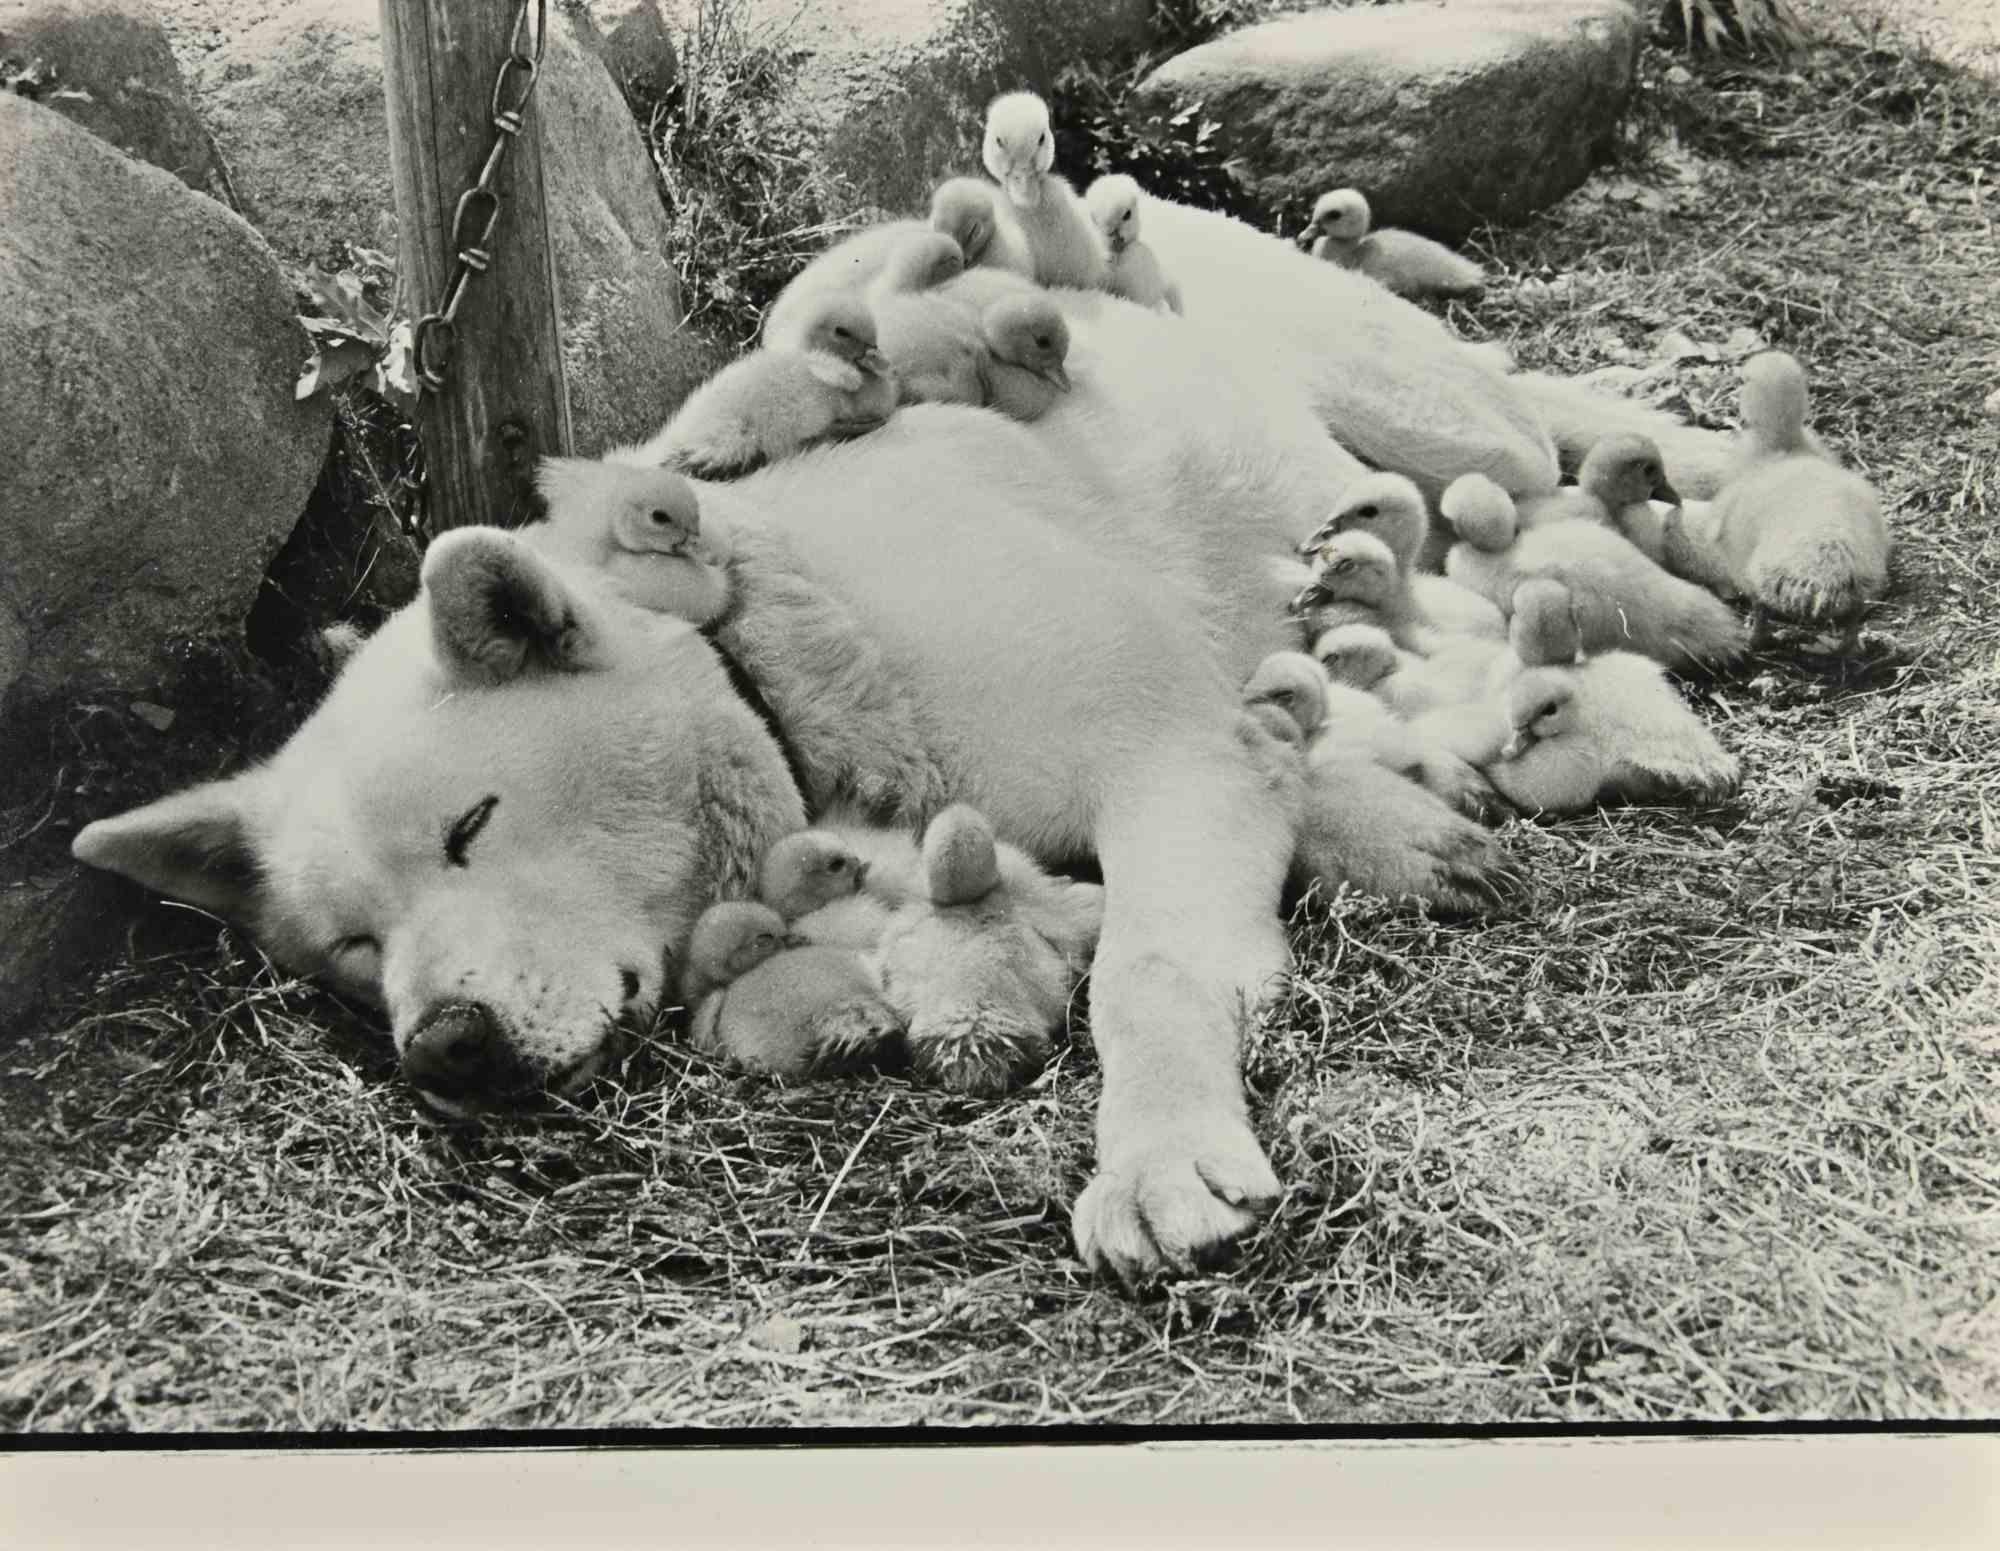 Unknown Figurative Photograph - Dog and ducklings - Photograph - 1960s